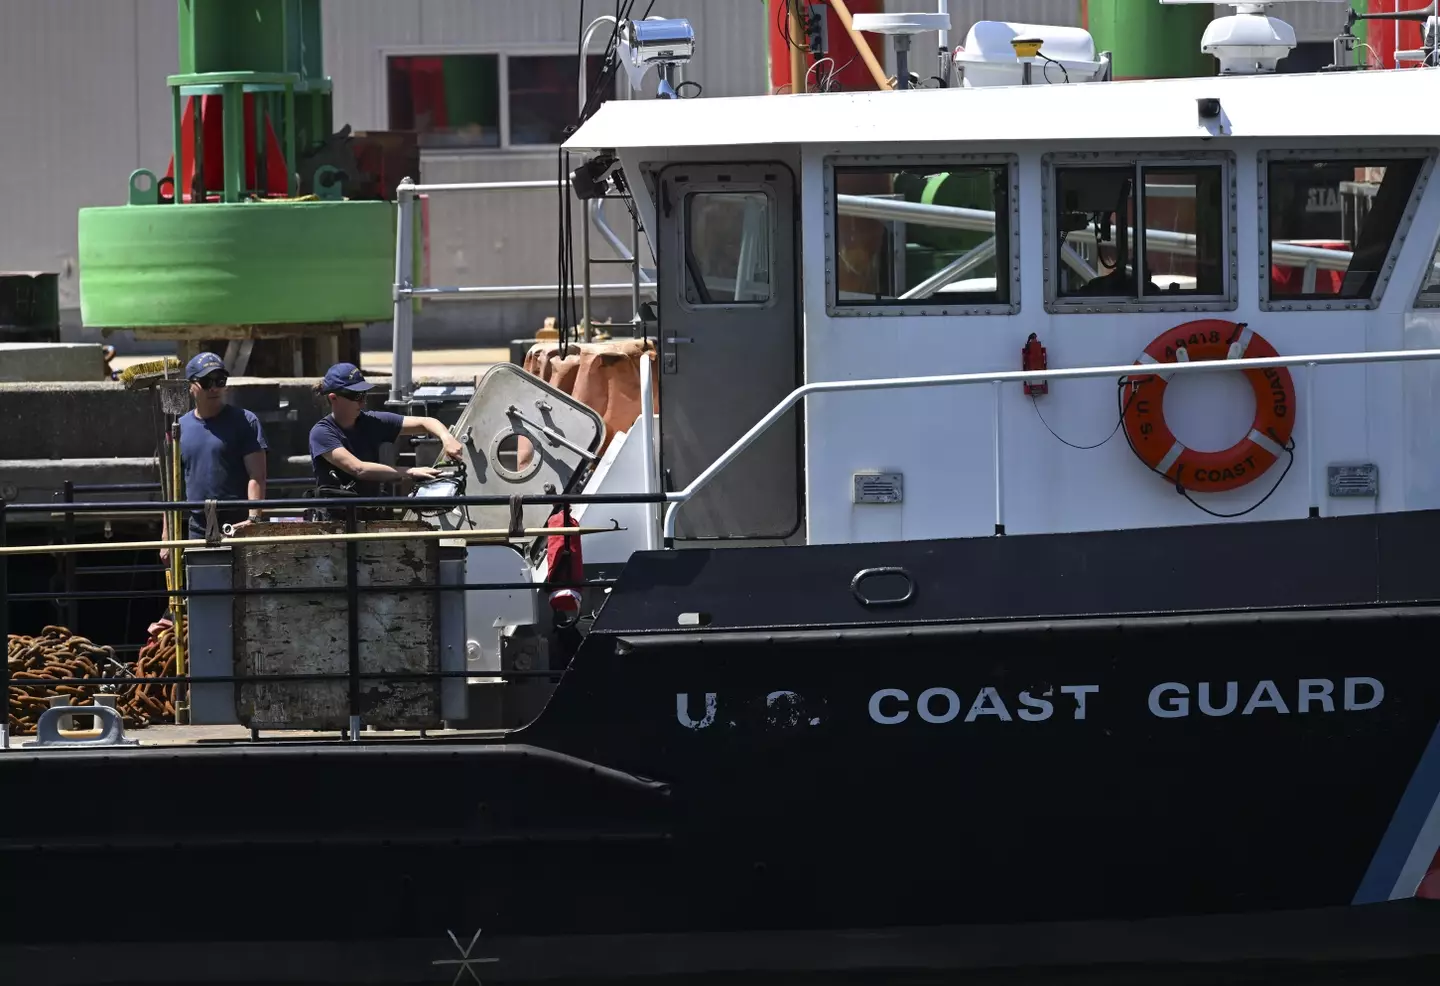 The US Coast Guard took over the search for the man (Getty Images/ Fatih Aktas/ Anadolu Agency)